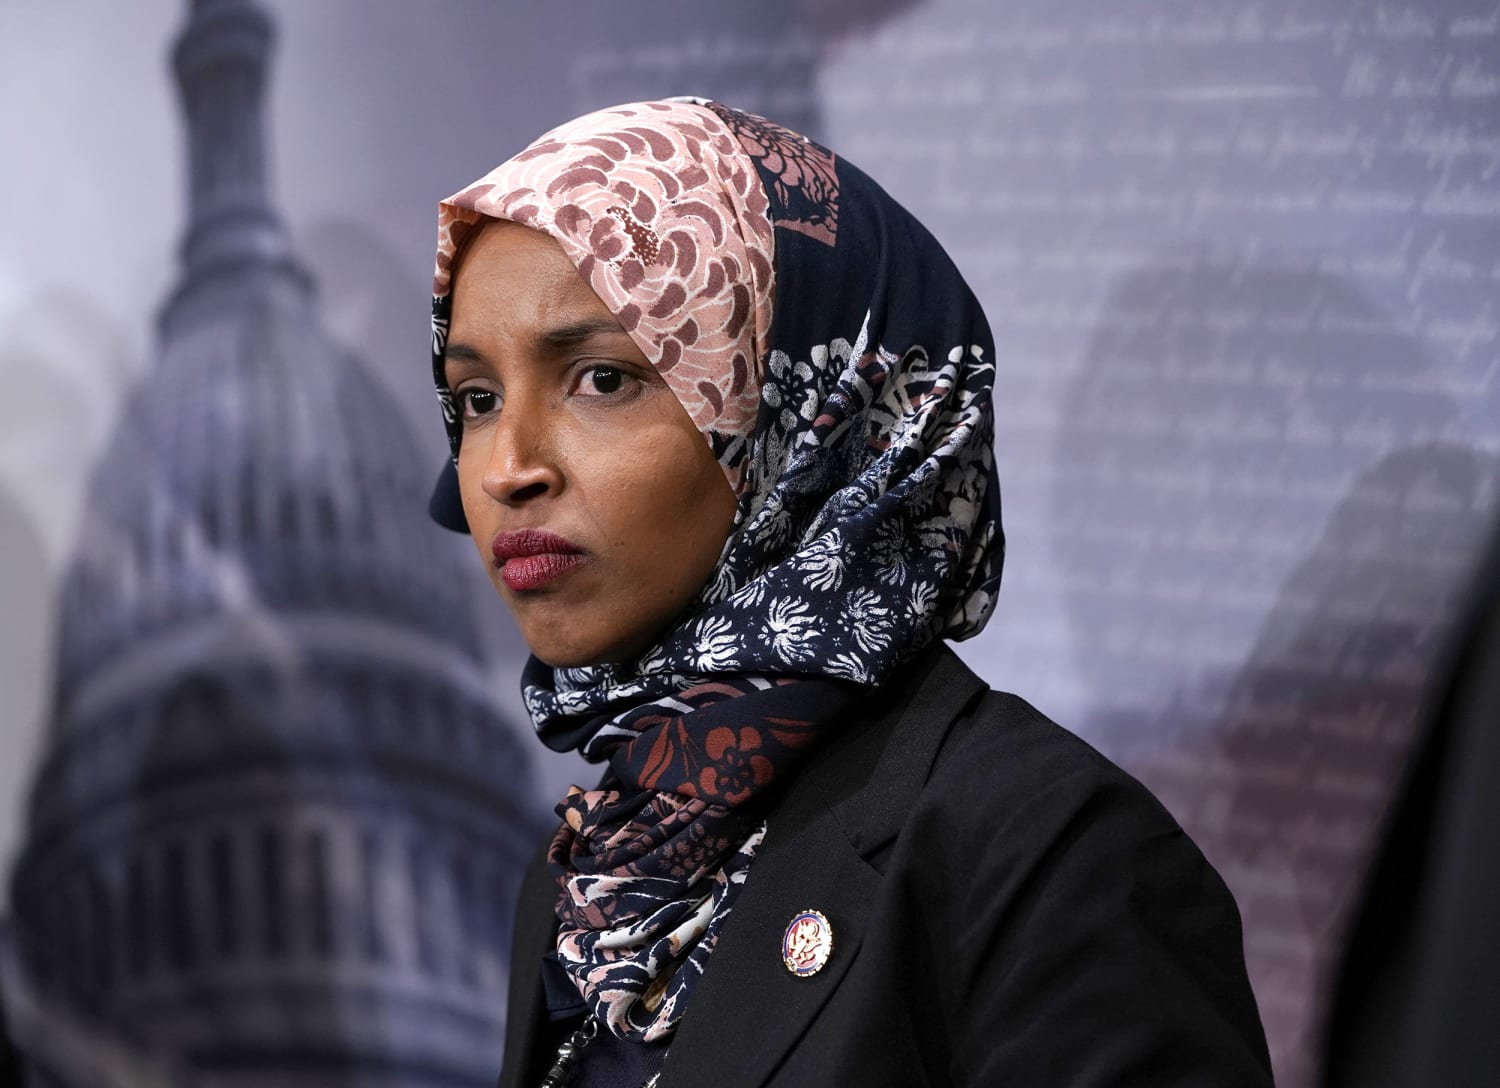 Rep Omar Apologizes For Controversial Tweets On Israel Lobby After